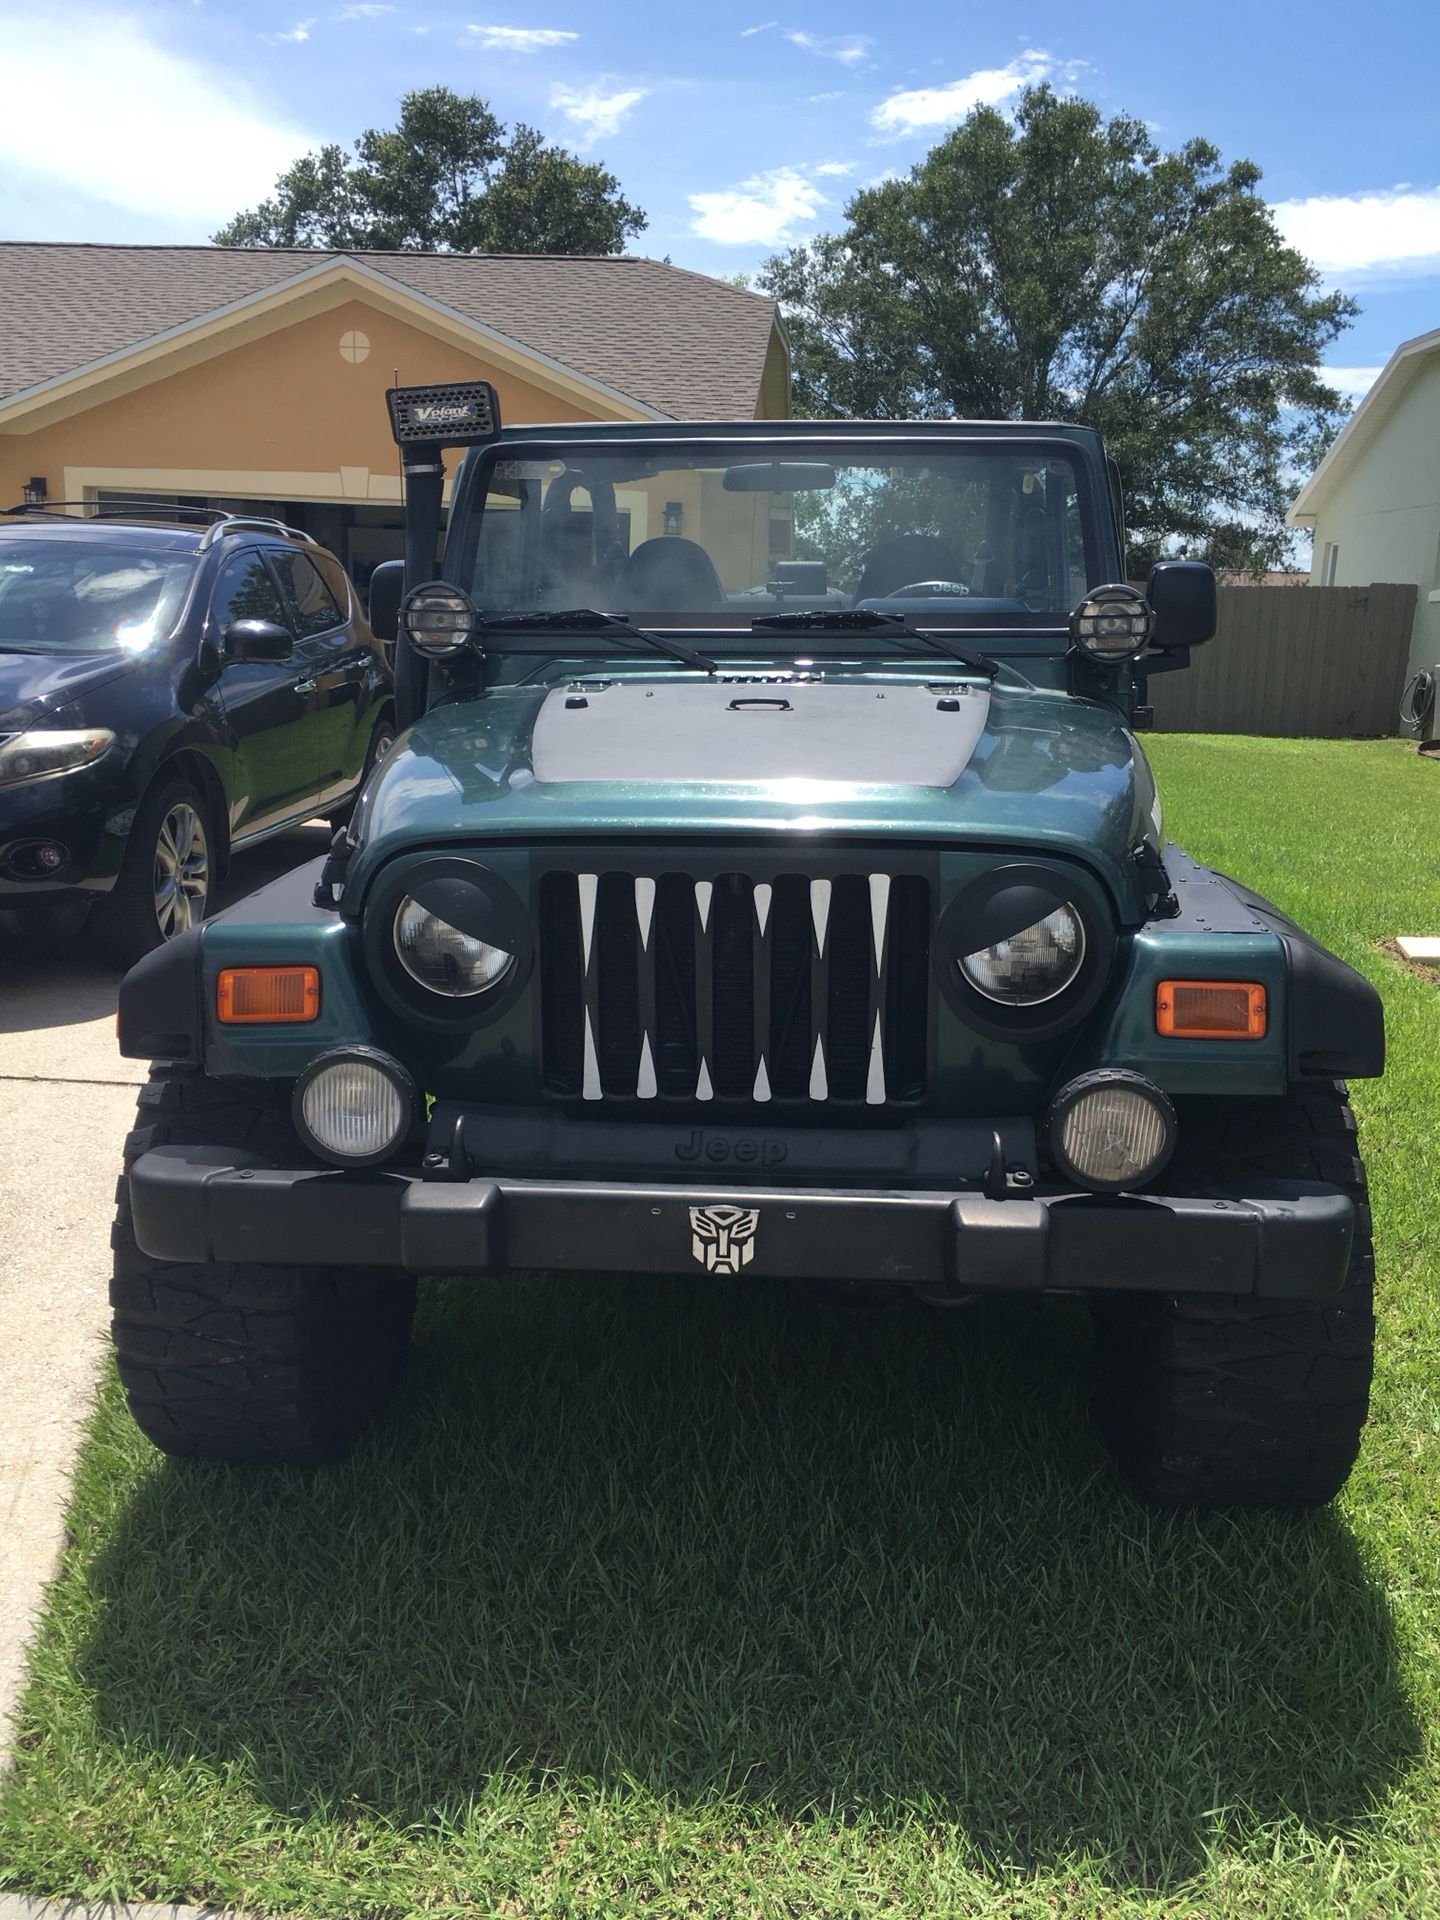 Jeep Wrangler parts and accessories for Sale in Lakeland, FL - OfferUp